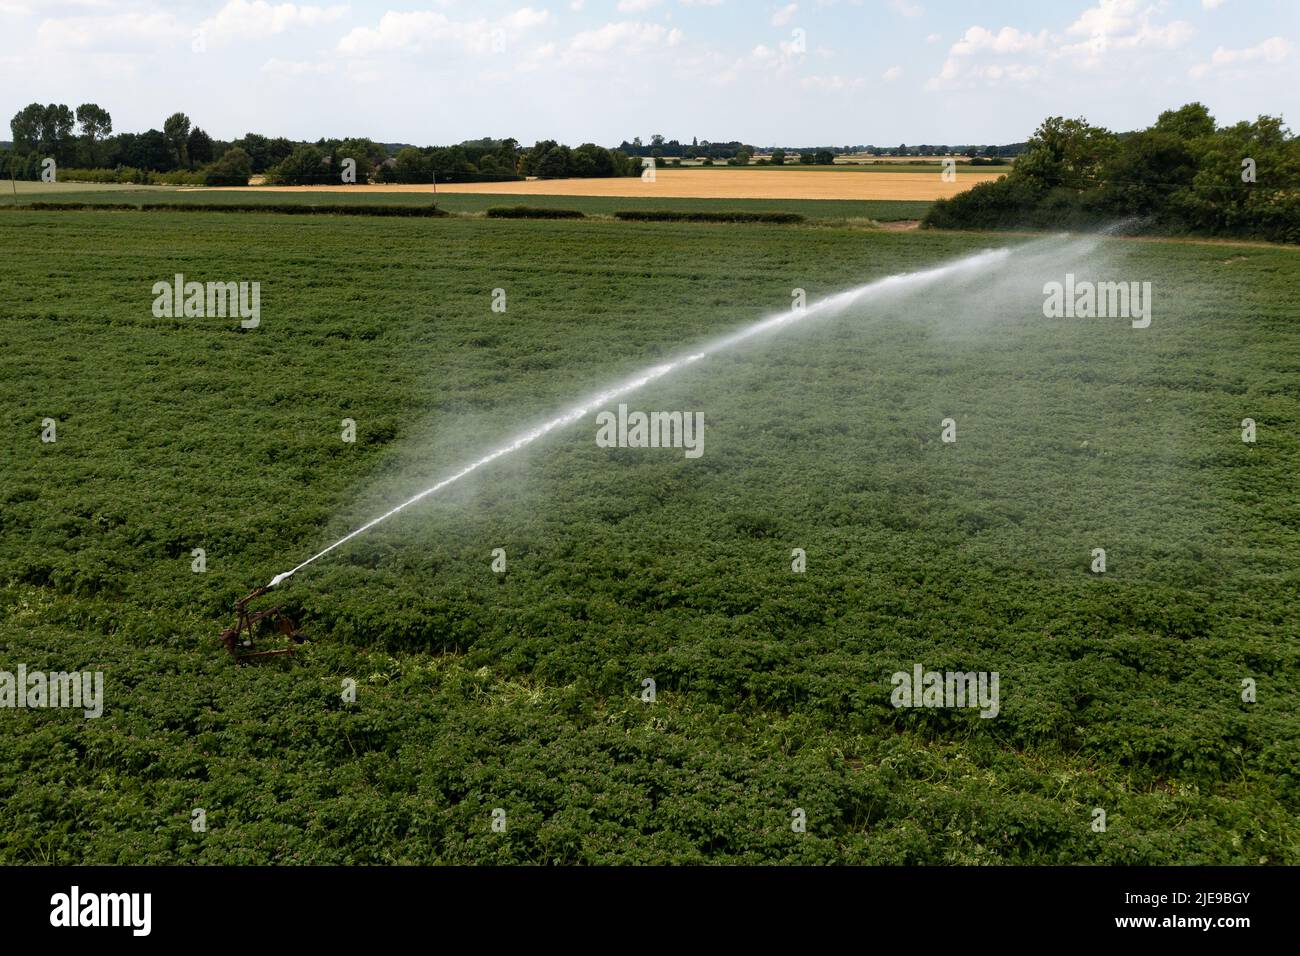 A jet water pressure sprayer being used to irrigate a potato crop during drough weather conditions with copy space Stock Photo